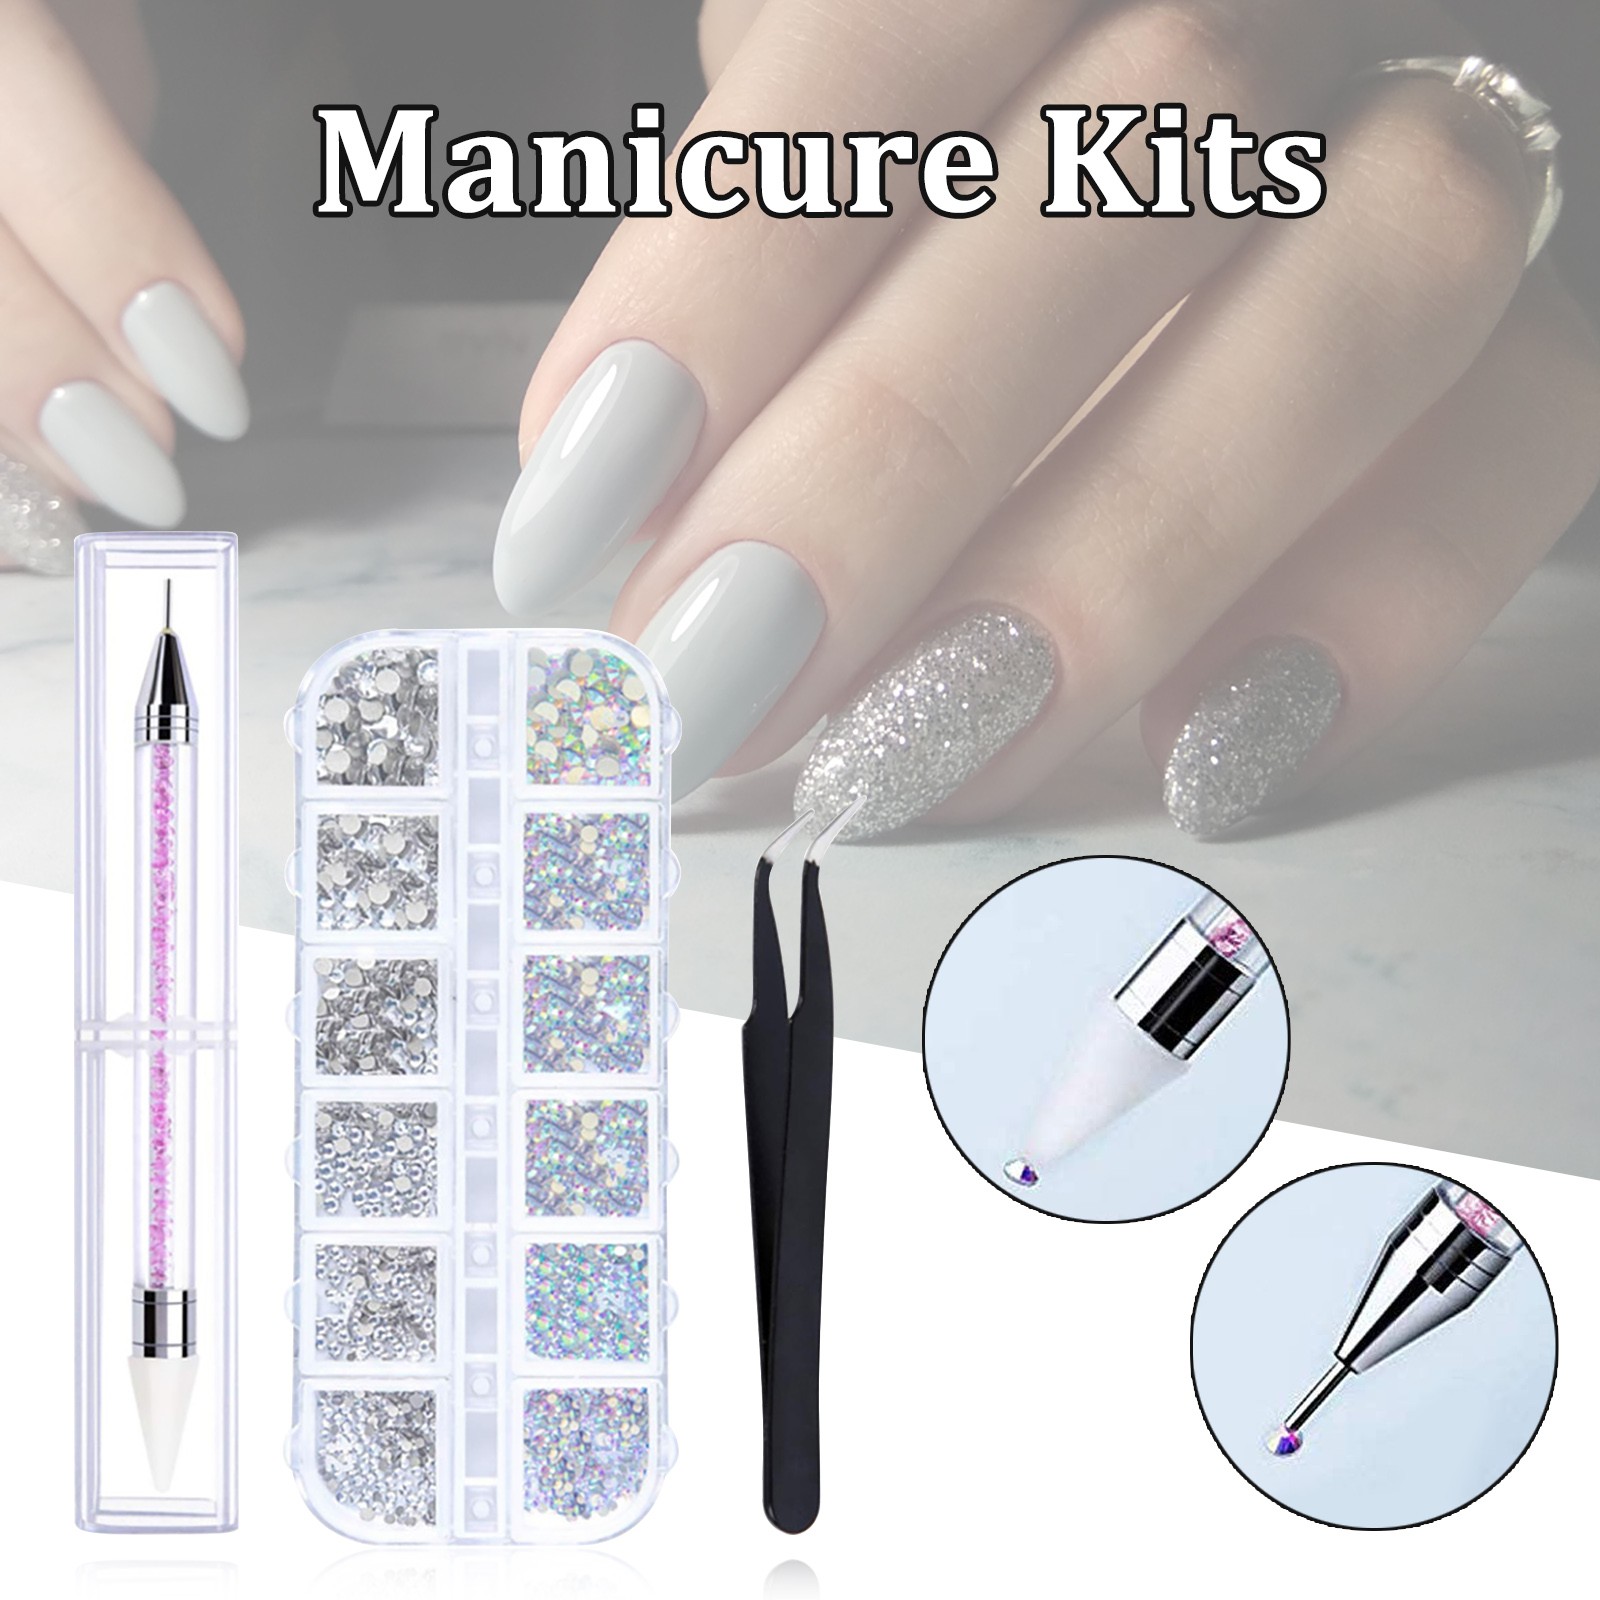 Self-adhesive Gluing Nails/Clothing for Rhinestones for Crystal Gemstones 